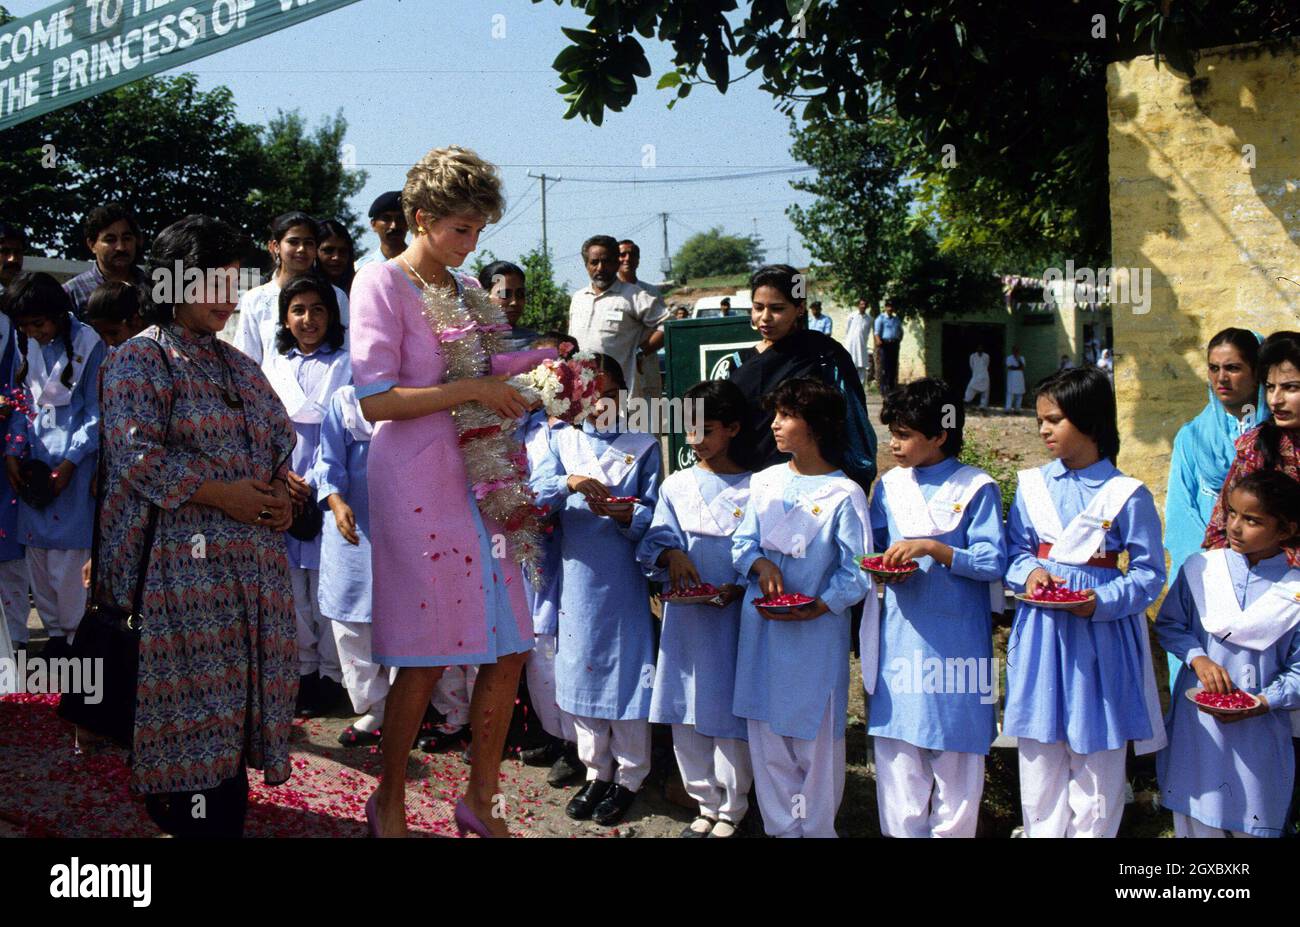 Diana, Princess of Wales is welcomed by school girls throwing petals as she visits a school in Islamabad during her visit to Pakistan in October 1991. Anwar Hussein/EMPICS Entertainment  Stock Photo